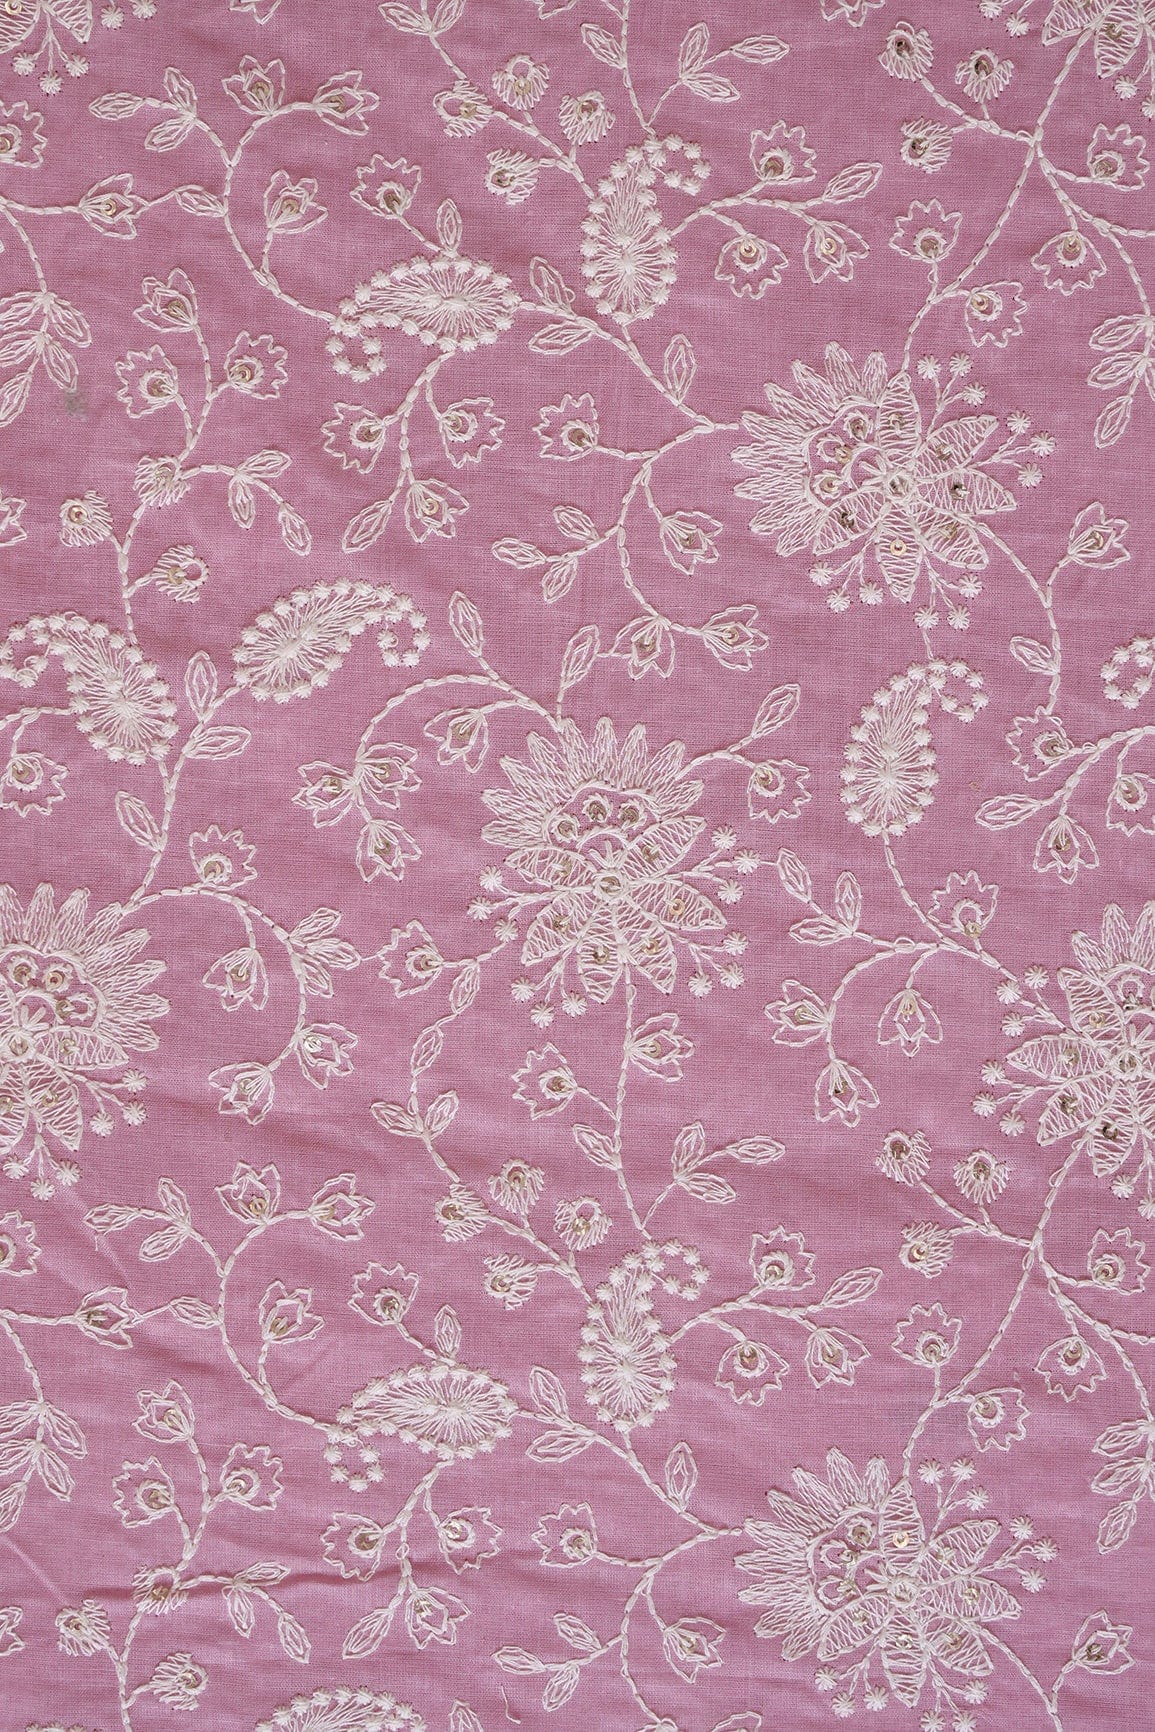 Beautiful White Thread With Gold Sequins Lucknowi Floral Embroidery Work On Pink Soft Cotton Fabric - doeraa